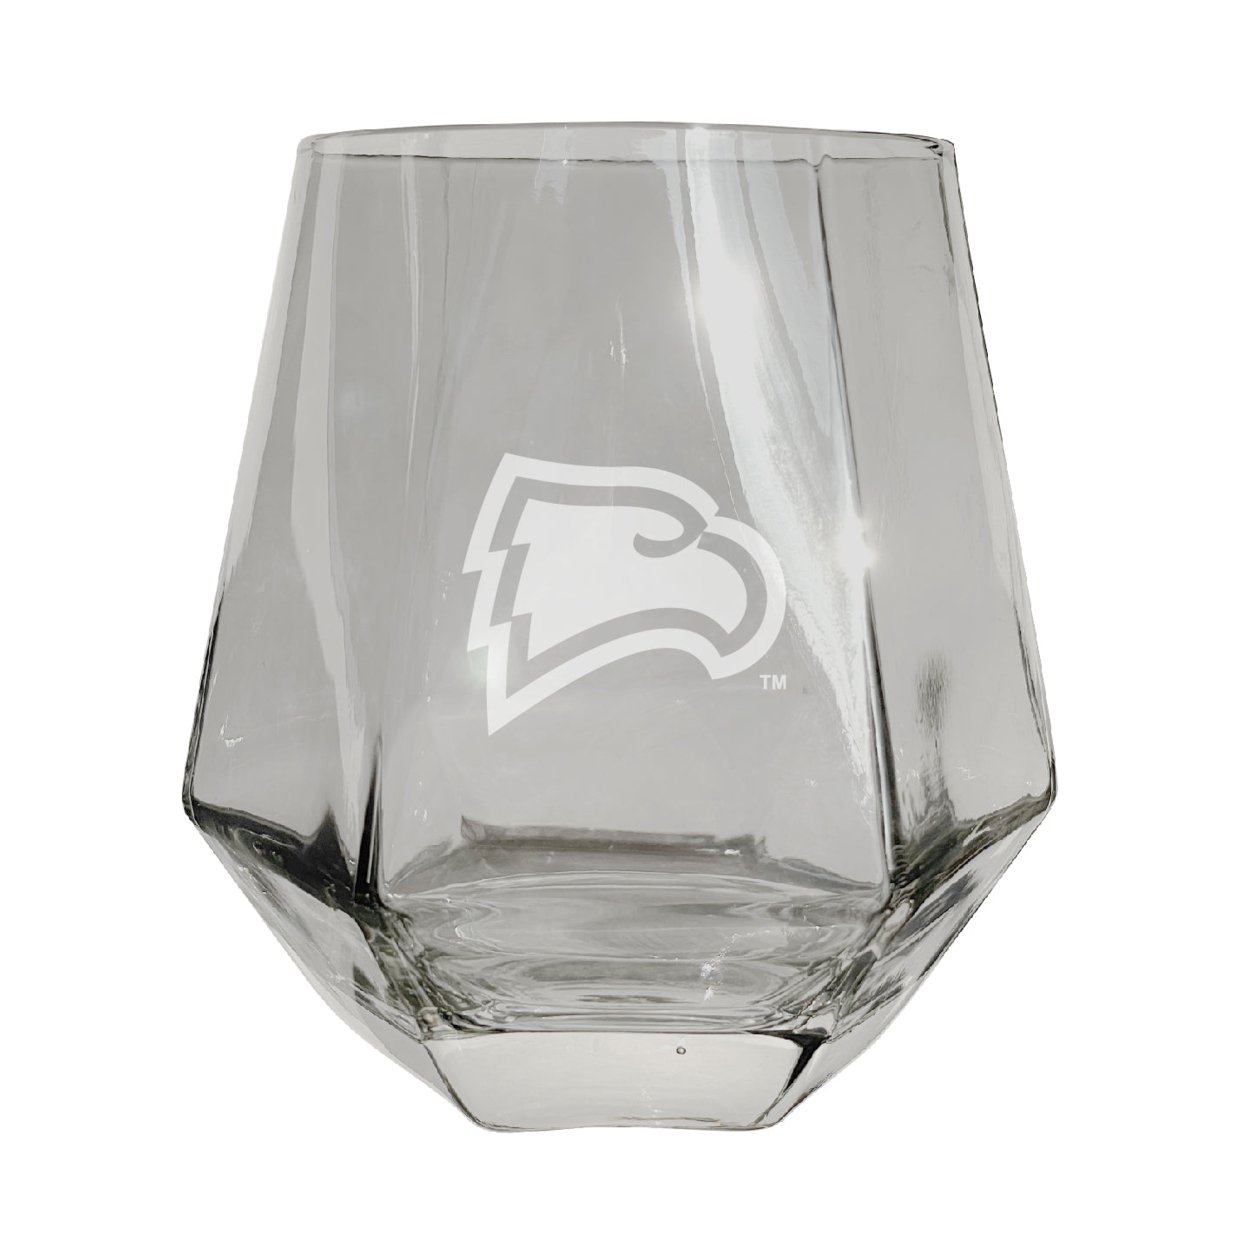 Winthrop University Etched Diamond Cut Stemless 10 Ounce Wine Glass Clear